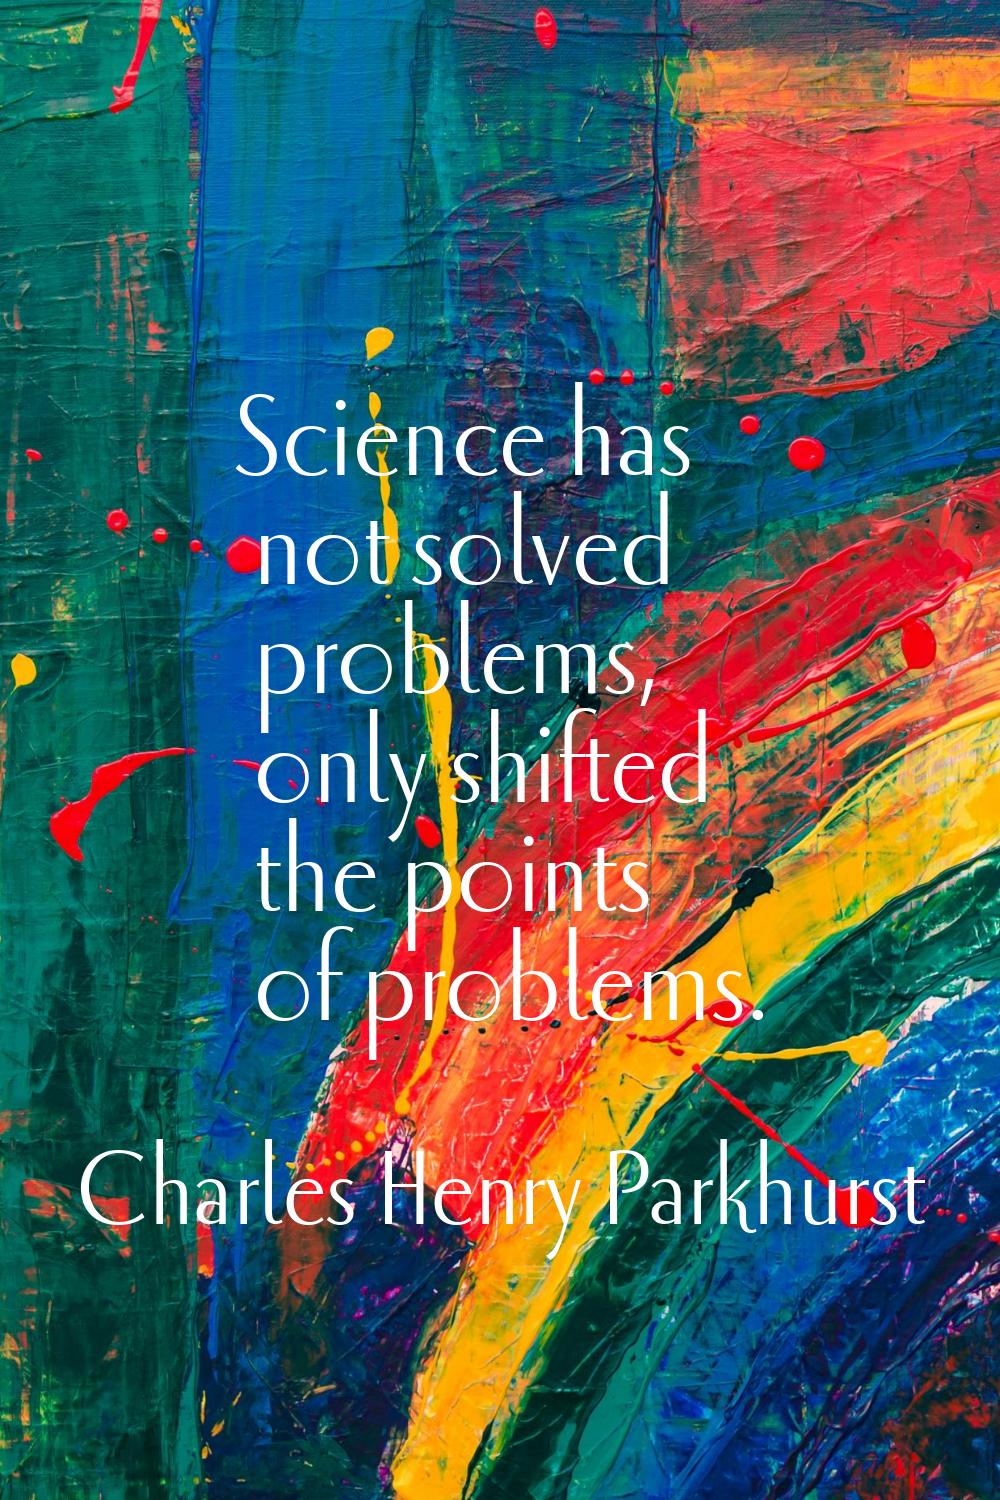 Science has not solved problems, only shifted the points of problems.